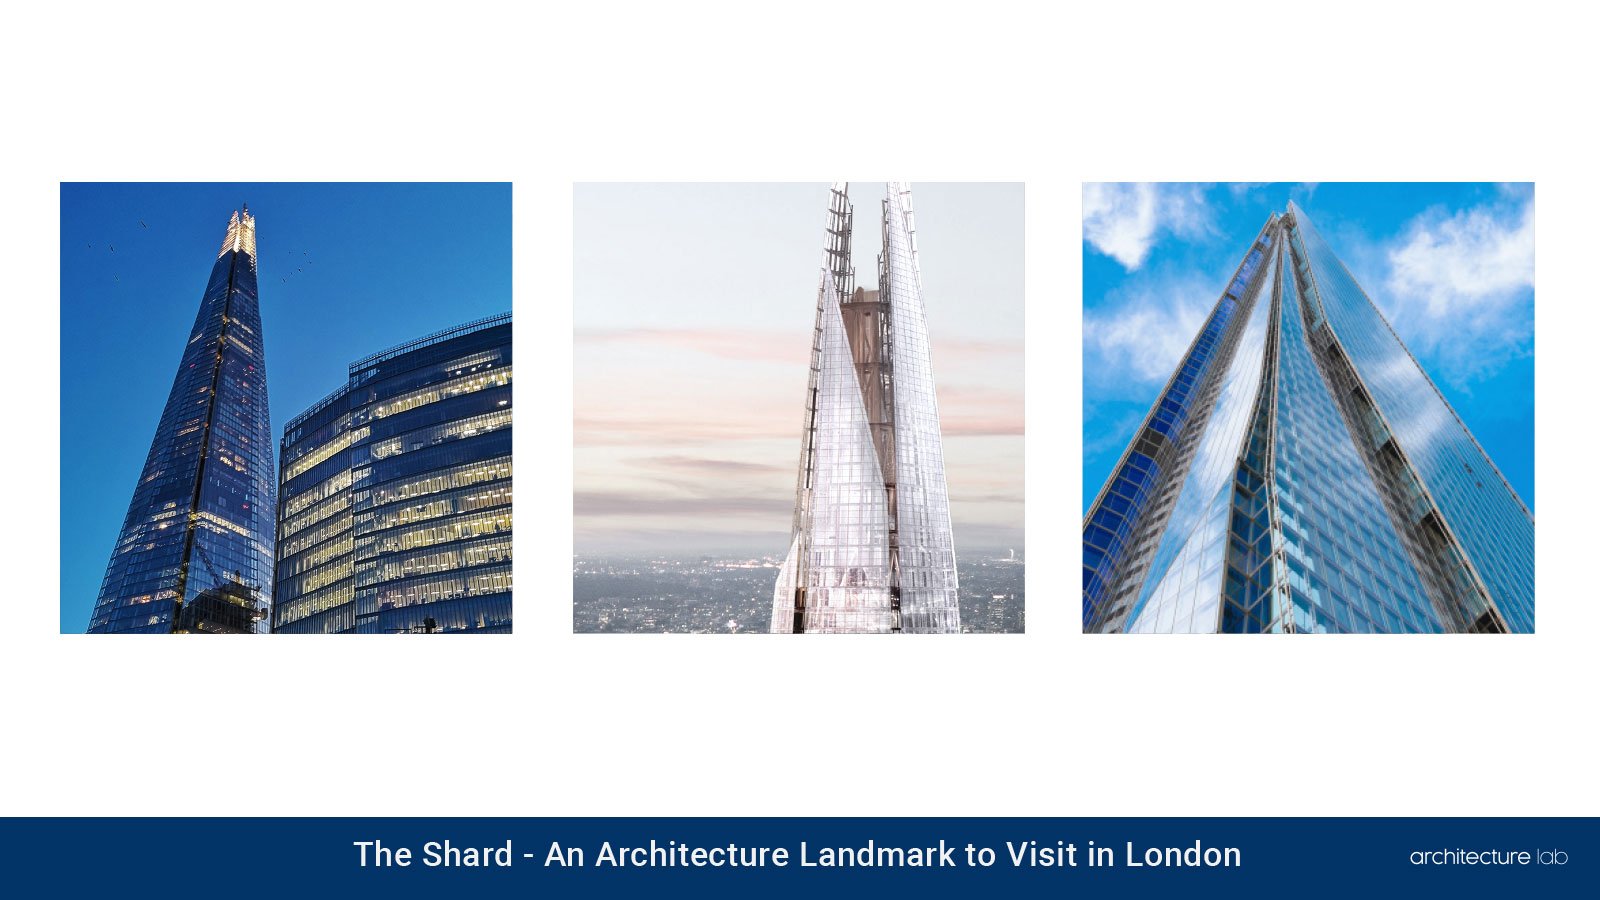 The shard: an architecture landmark to visit in london